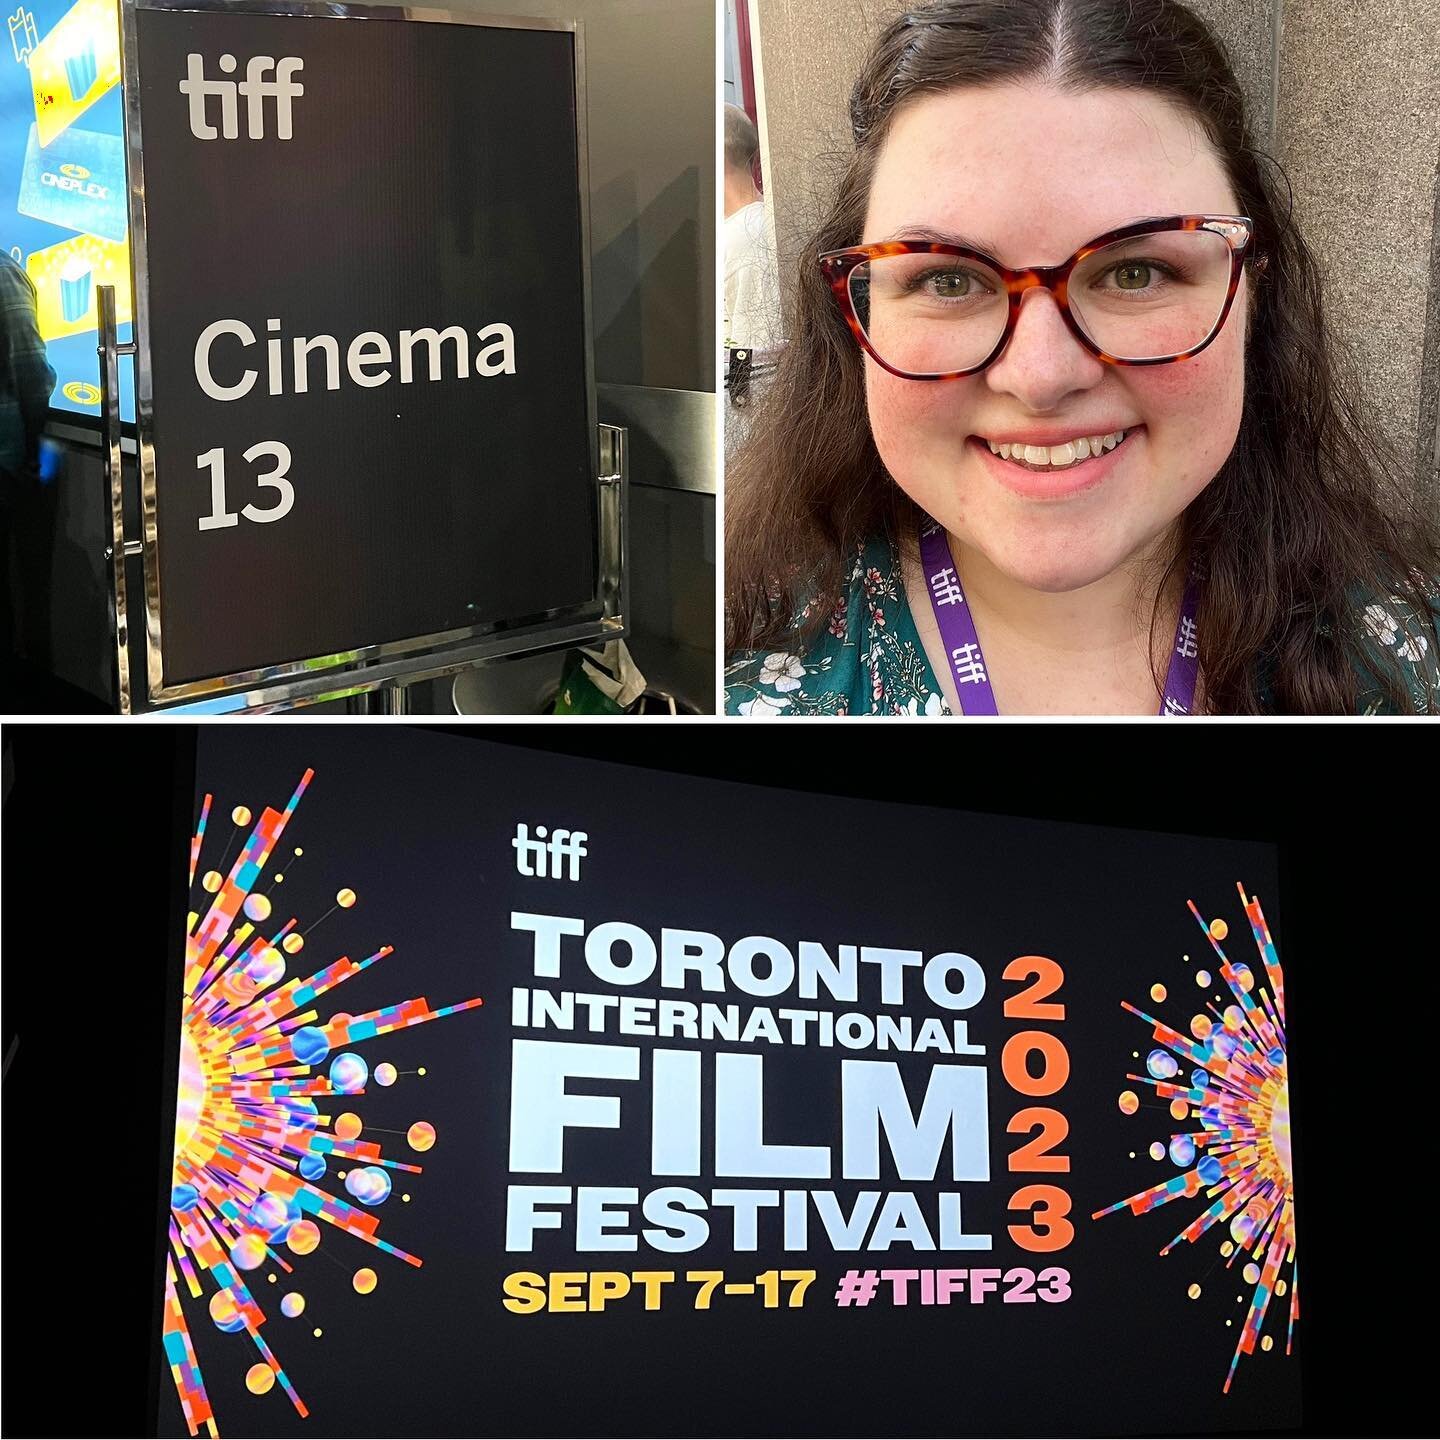 Back in the game 😘 
&bull;
Flew in at 12:30 and was at a screening by 3! Kicked it off with Bria Mack Gets A Life, so great that TIFF is embracing series achievements alongside film. It&rsquo;s so good to be back 🧡